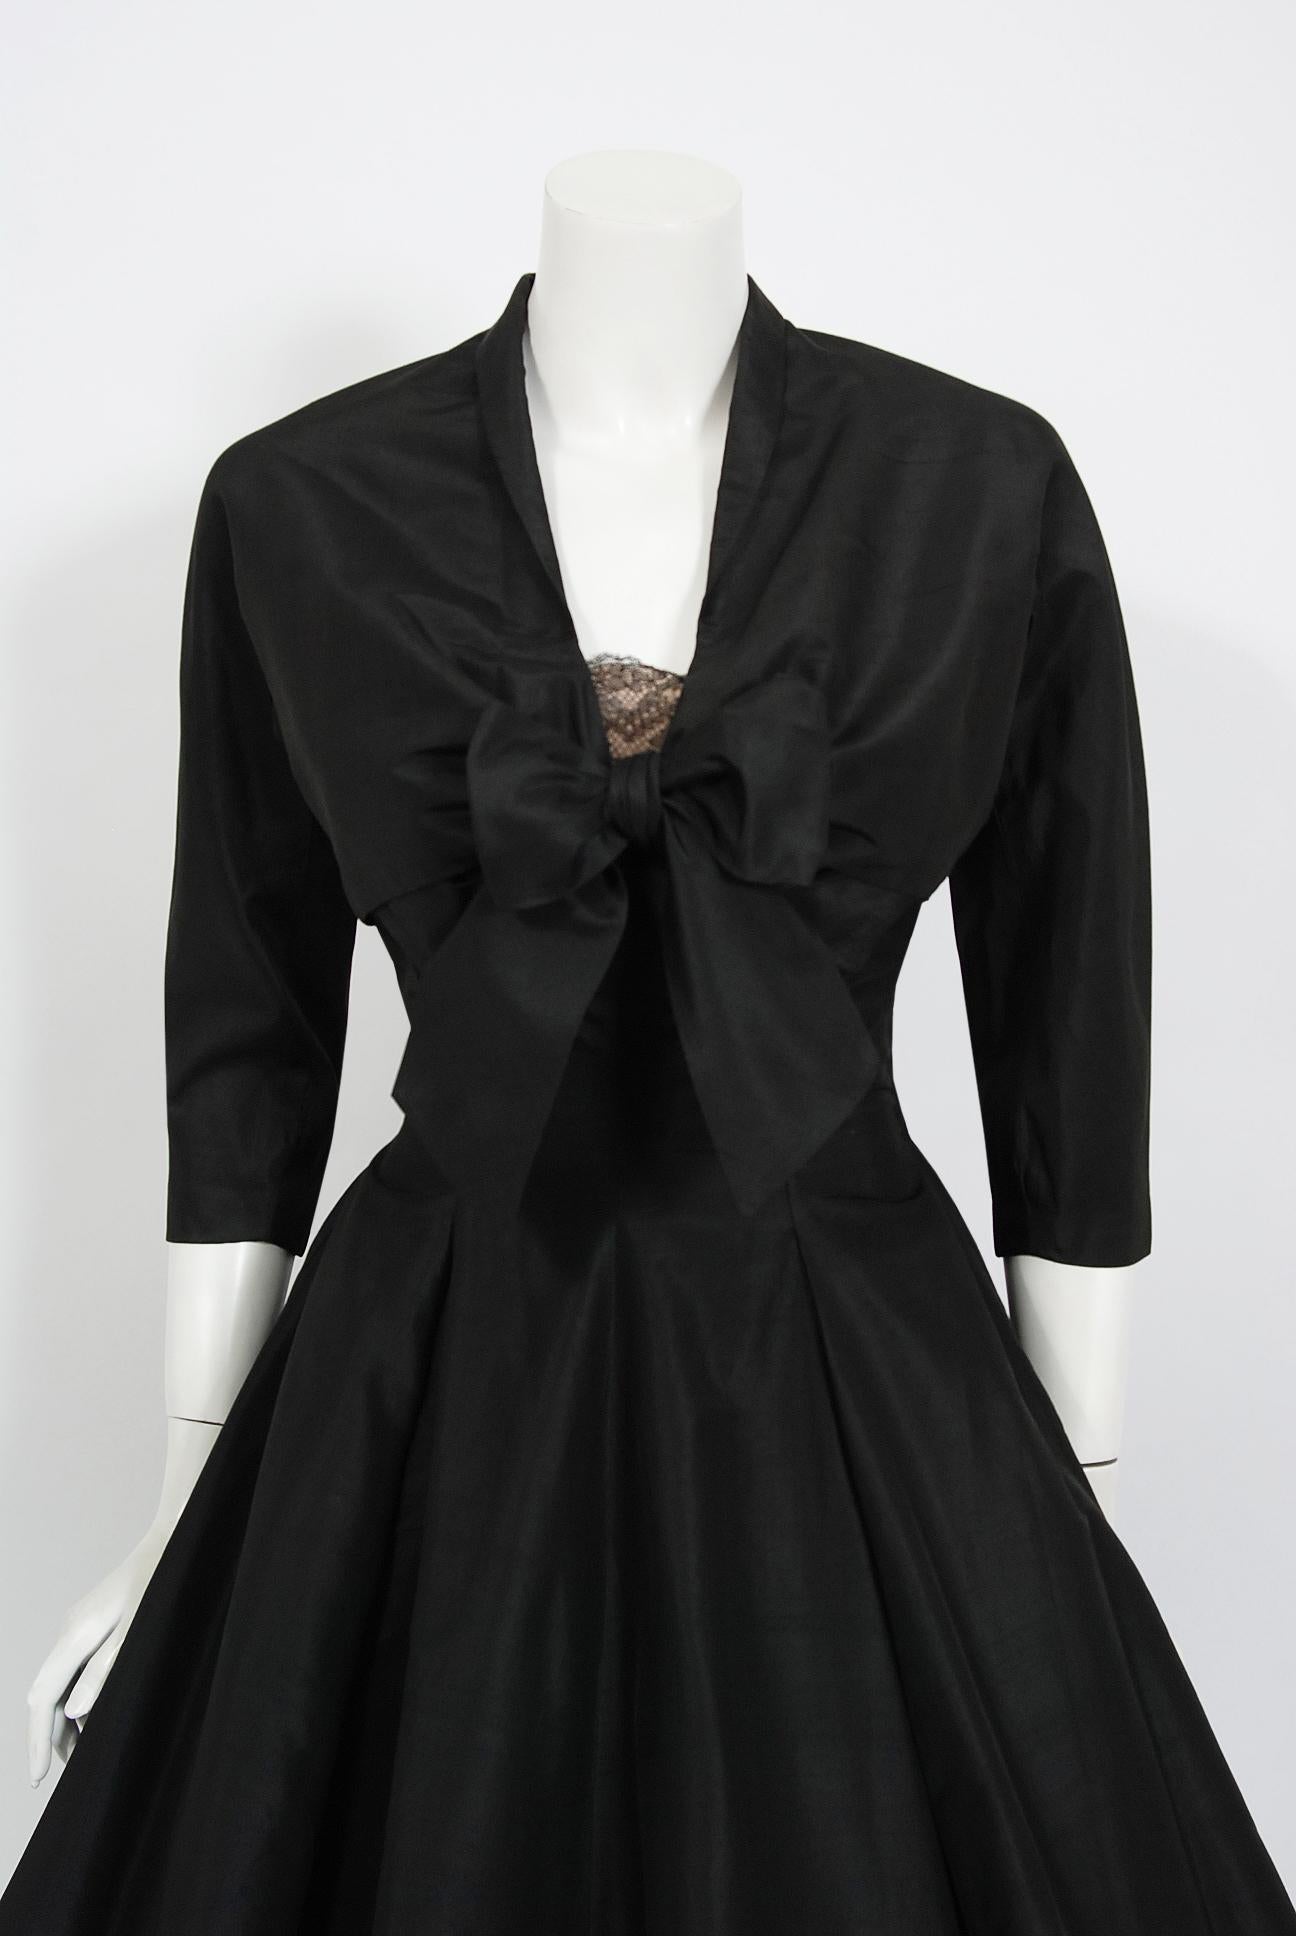 Breathtaking Harvey Berin designer black silk and chantilly lace party dress dating back to the mid 1950's. Harvey Berin opened his business in 1921, and by the 1940's he was an important name in women's fashion. His designer, Karen Stark, adapted